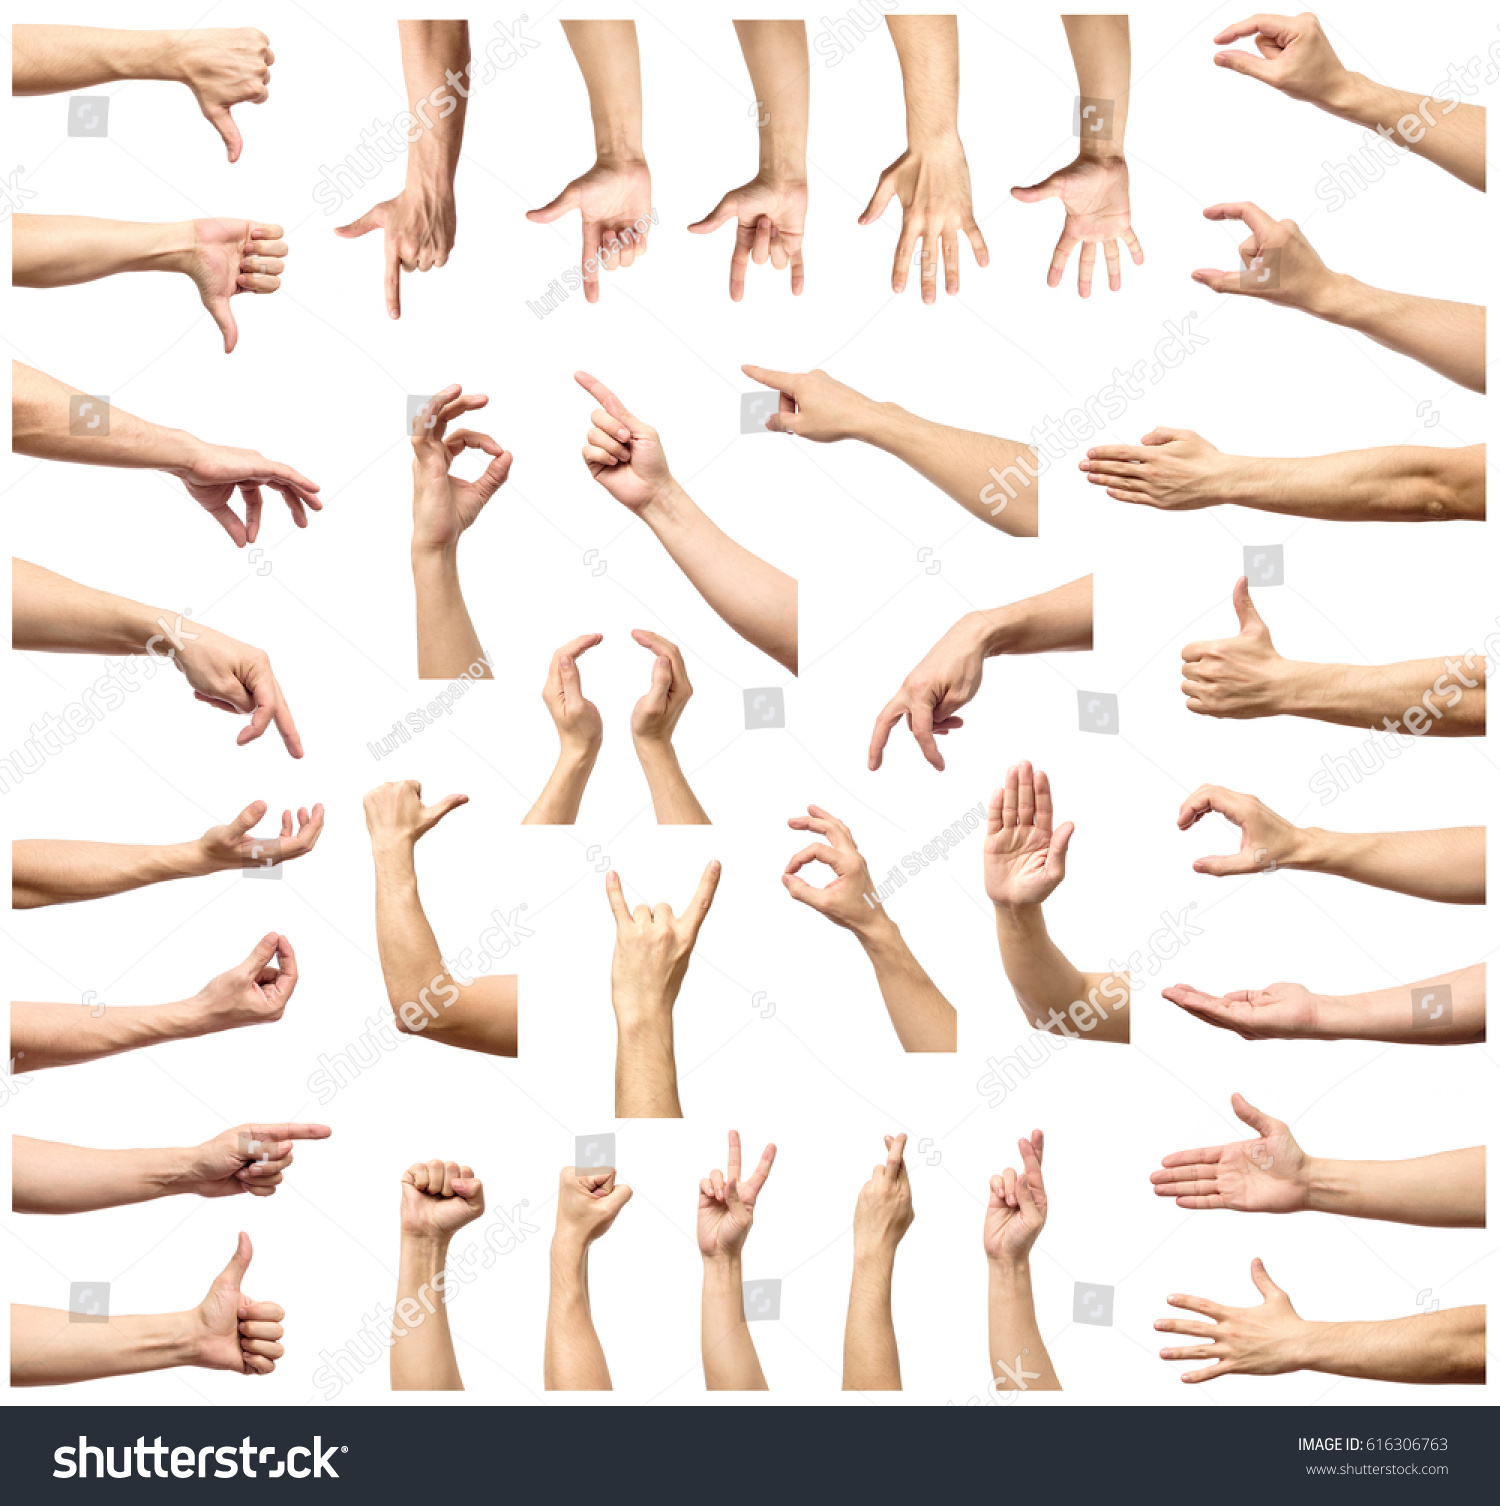 Male hand gesture and sign collection isolated over white background, set of multiple pictures #616306763